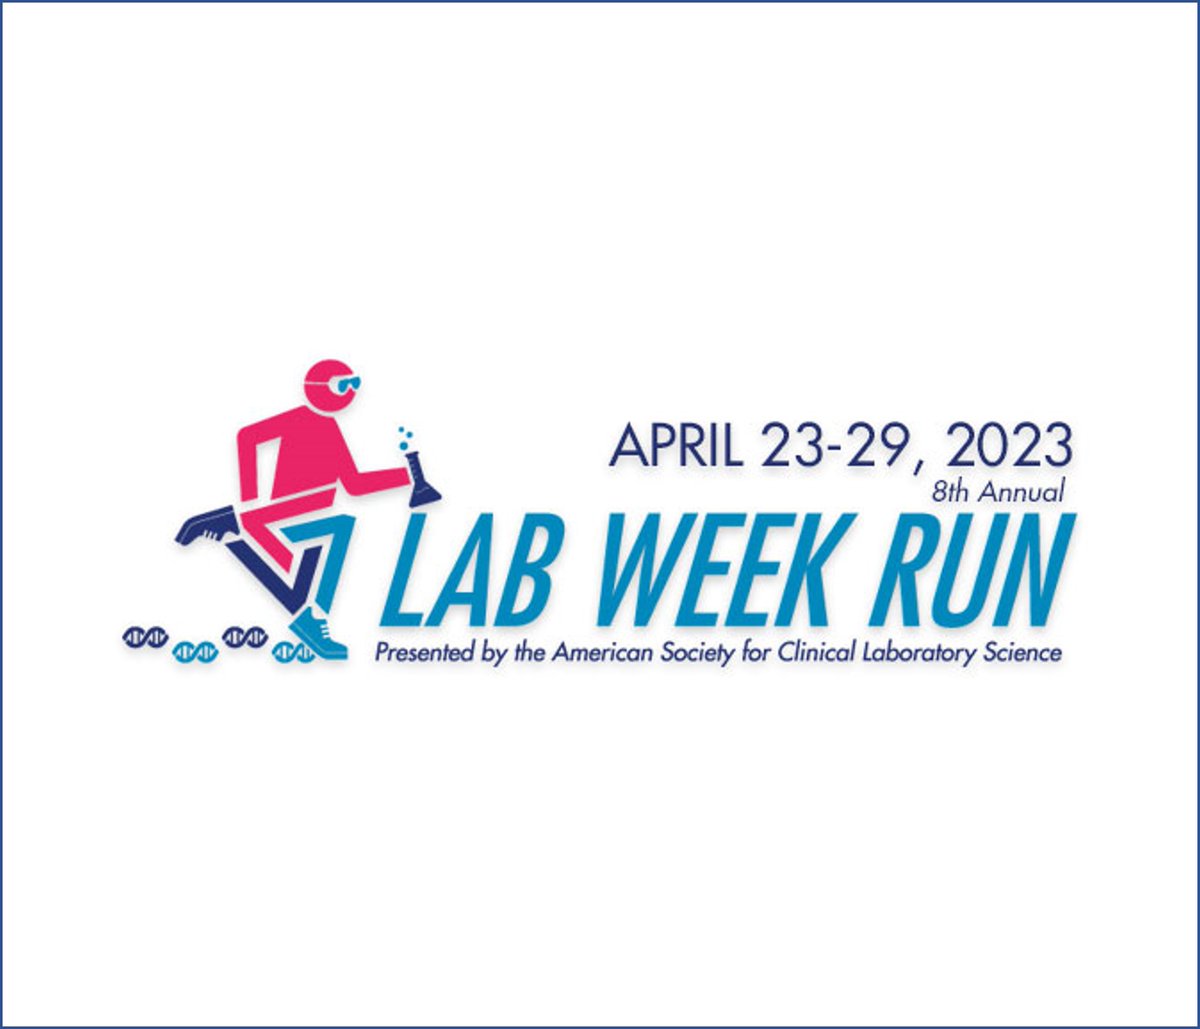 Did you participate in the #LabWeekRun? Share your accomplishments with us!!  We'd love to see them!

Learn more about the #LabWeekRun at labweekrun.com/#

#LabWeek2023 #MLPW #Lab4Life #IamASCLS #Labucate